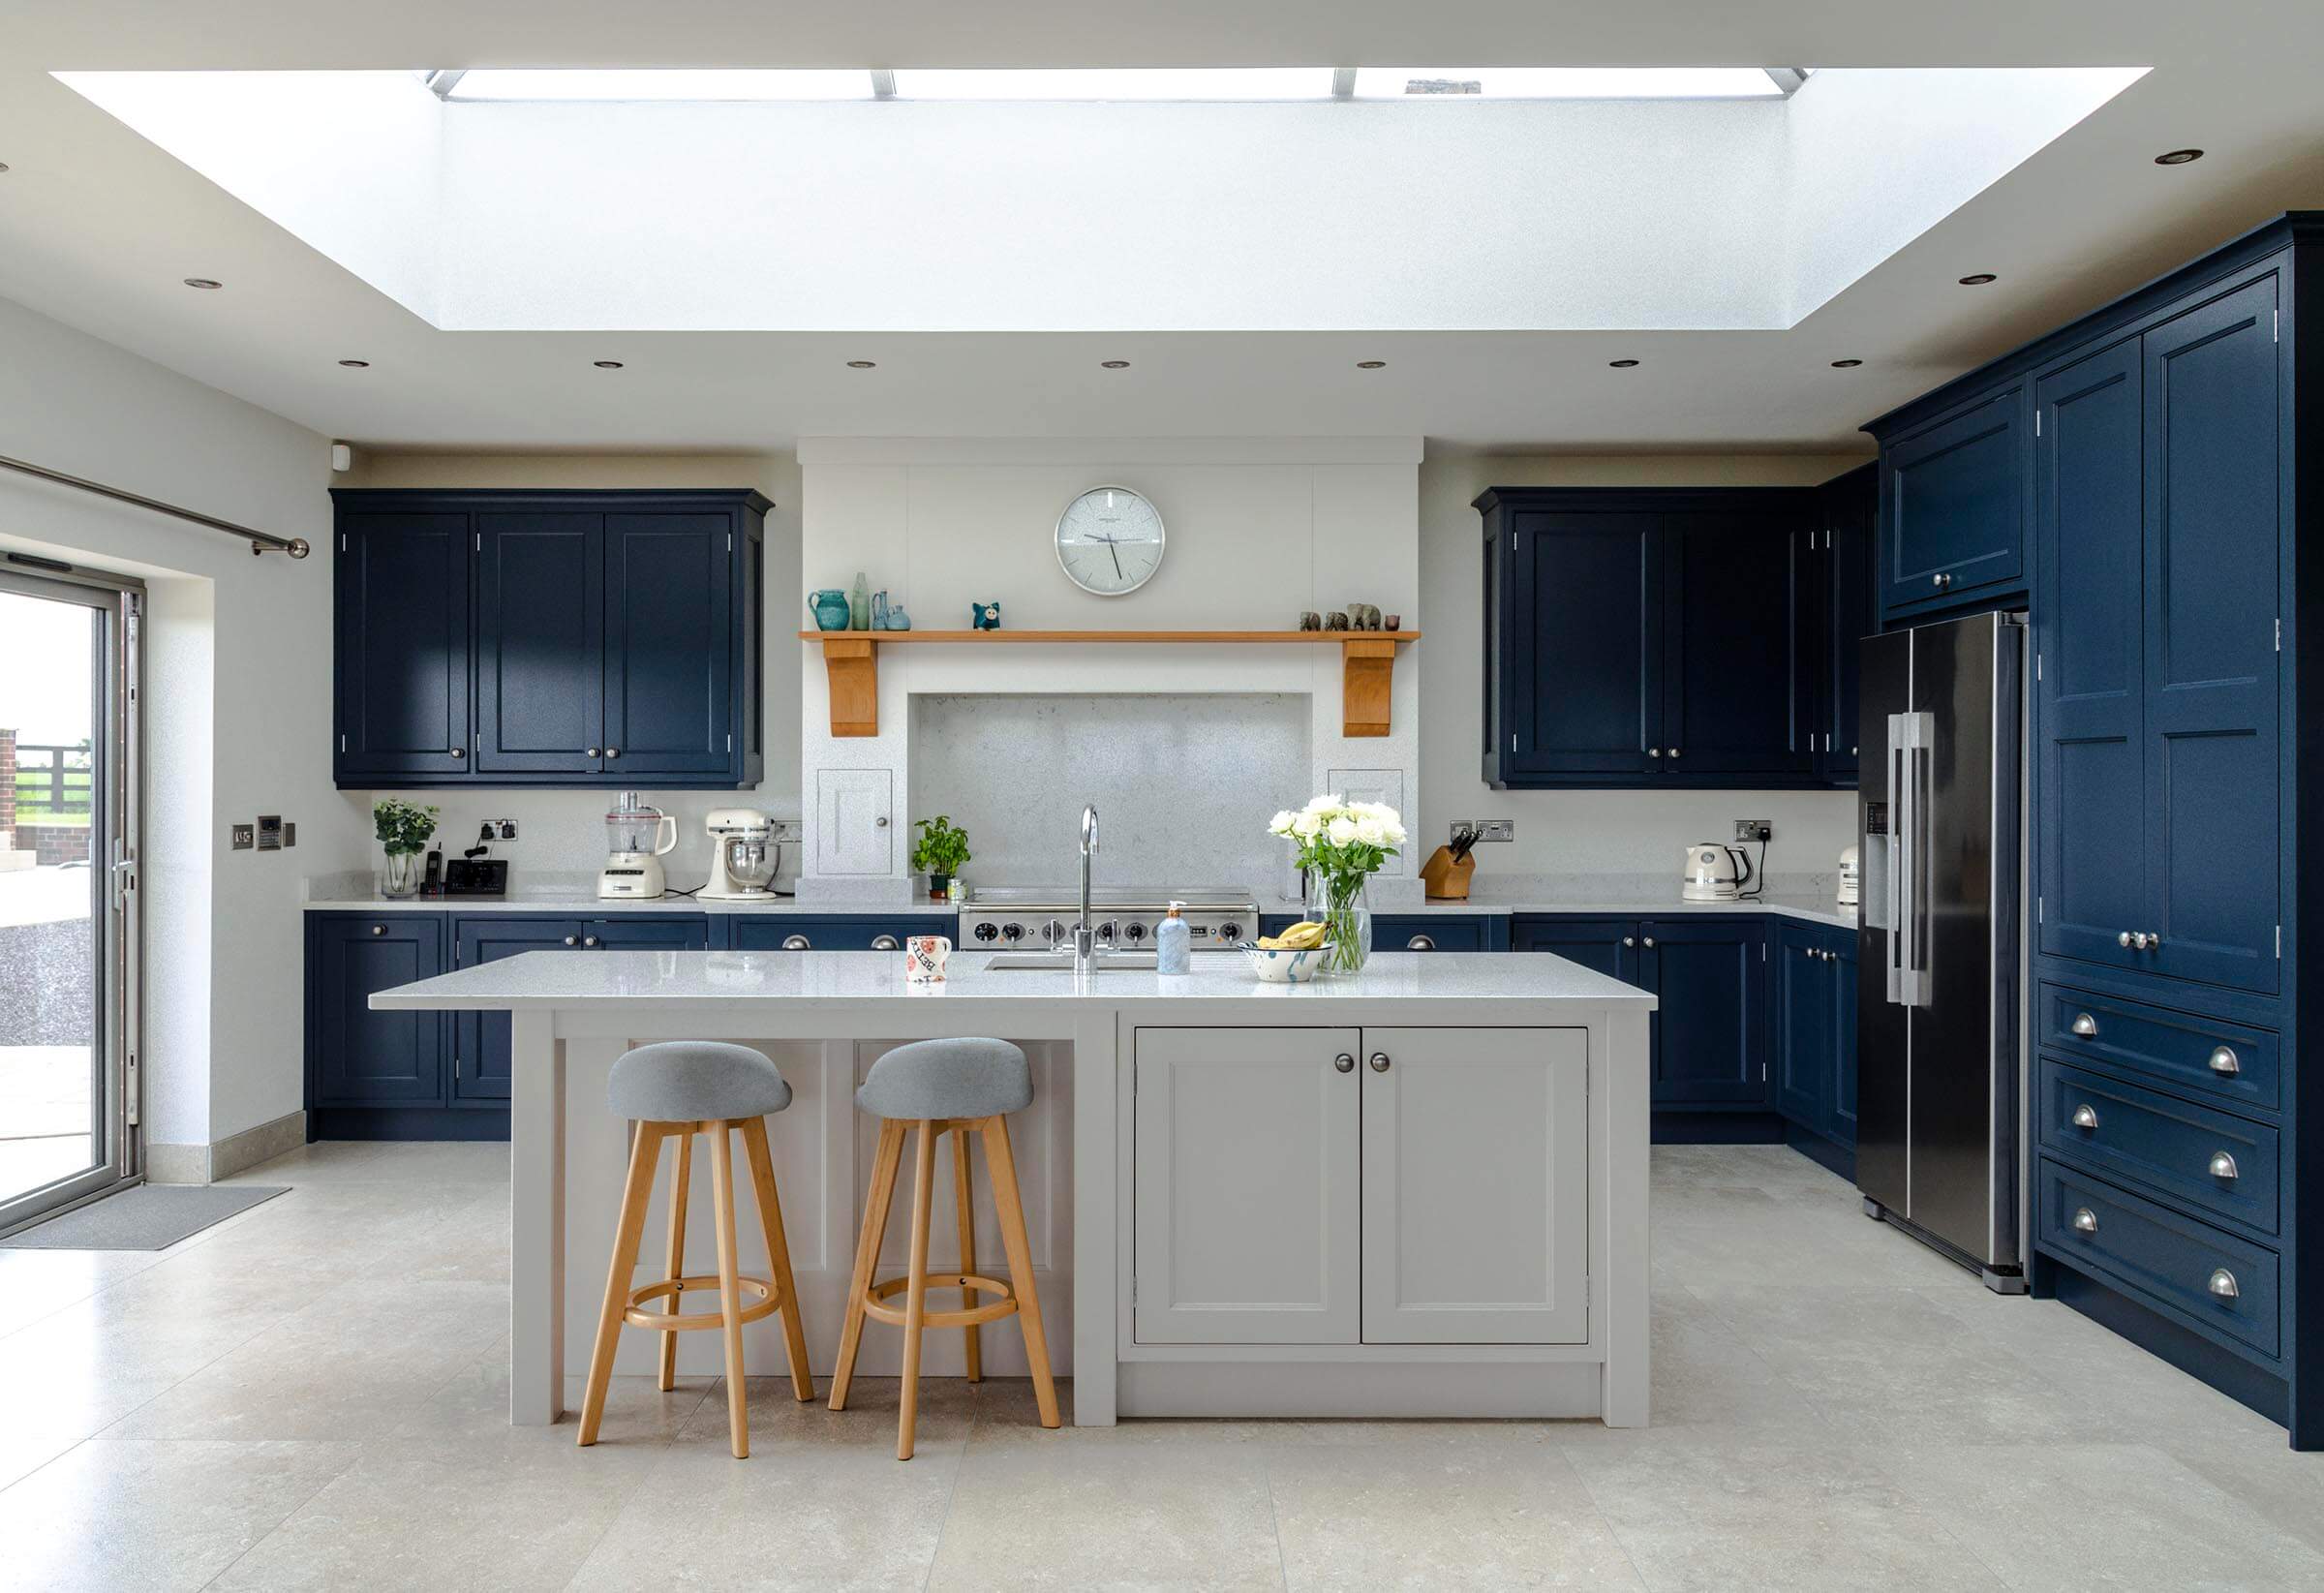 A stylish classic contemporary kitchen in blue and white handmade from solid wood, light spills into the room from a large skylight